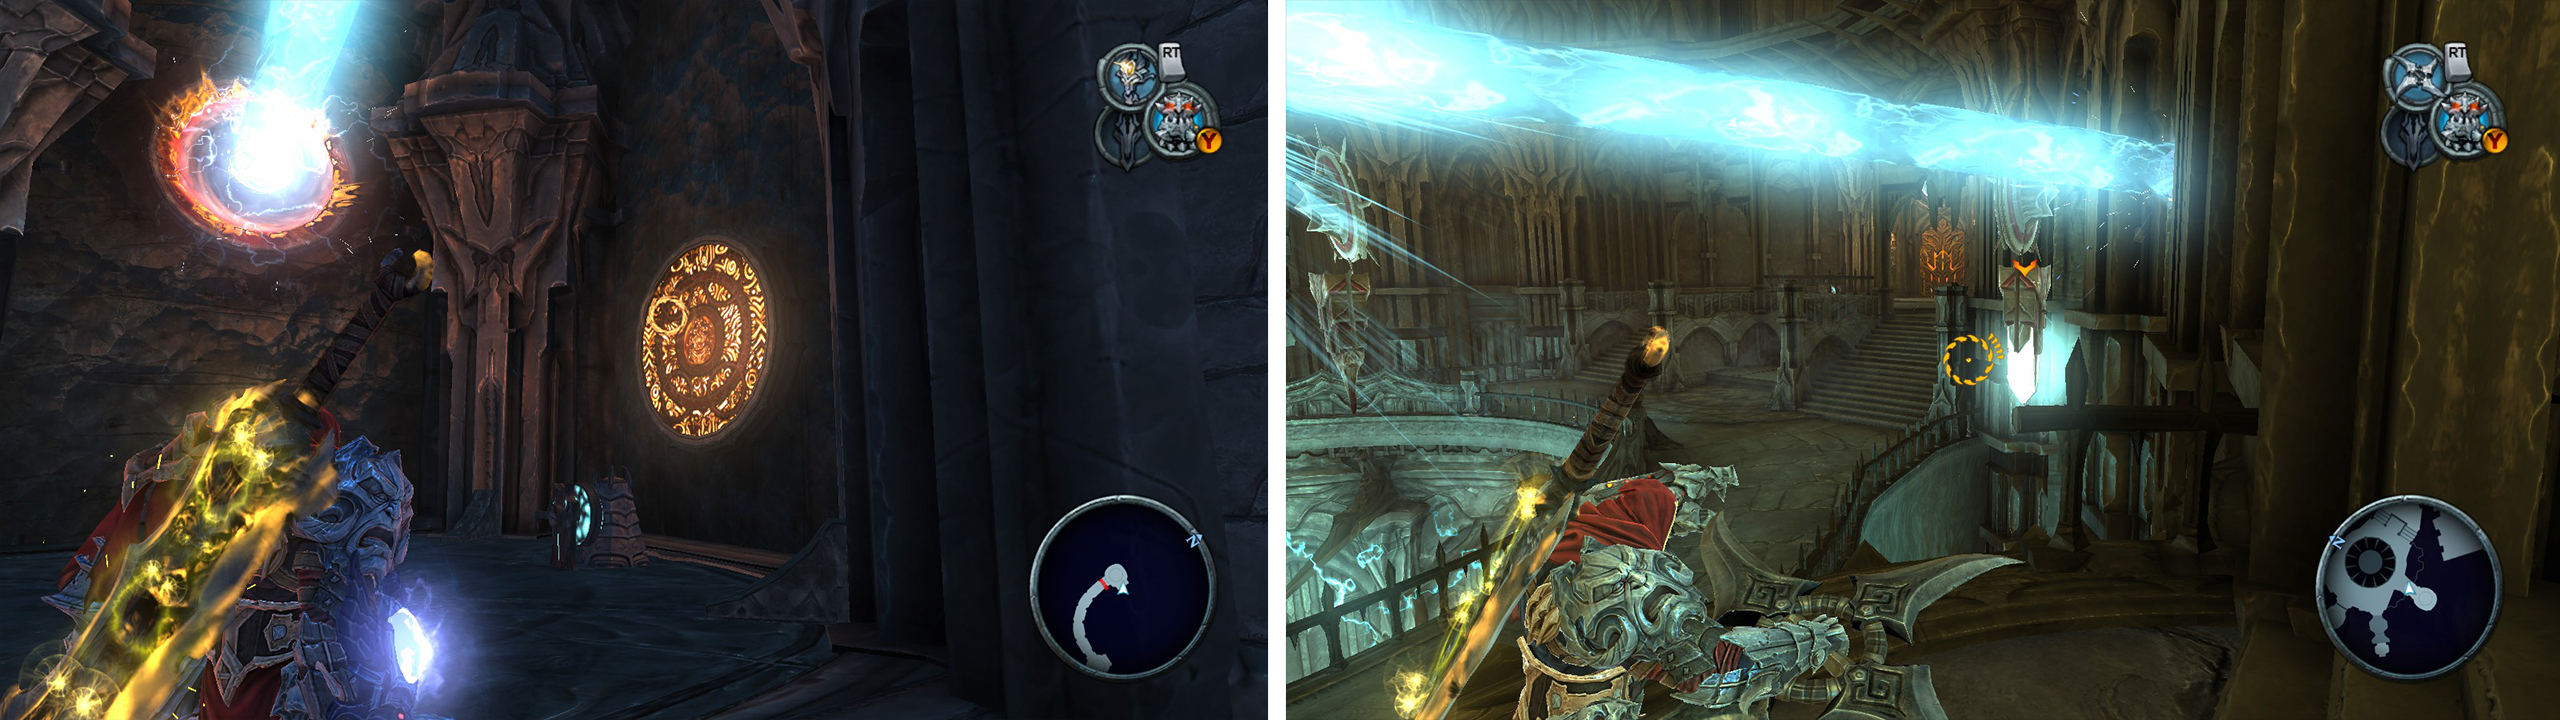 Re-direct the beam through the portal (left). Hit the crystal (right) to reflect the beam as necessary.